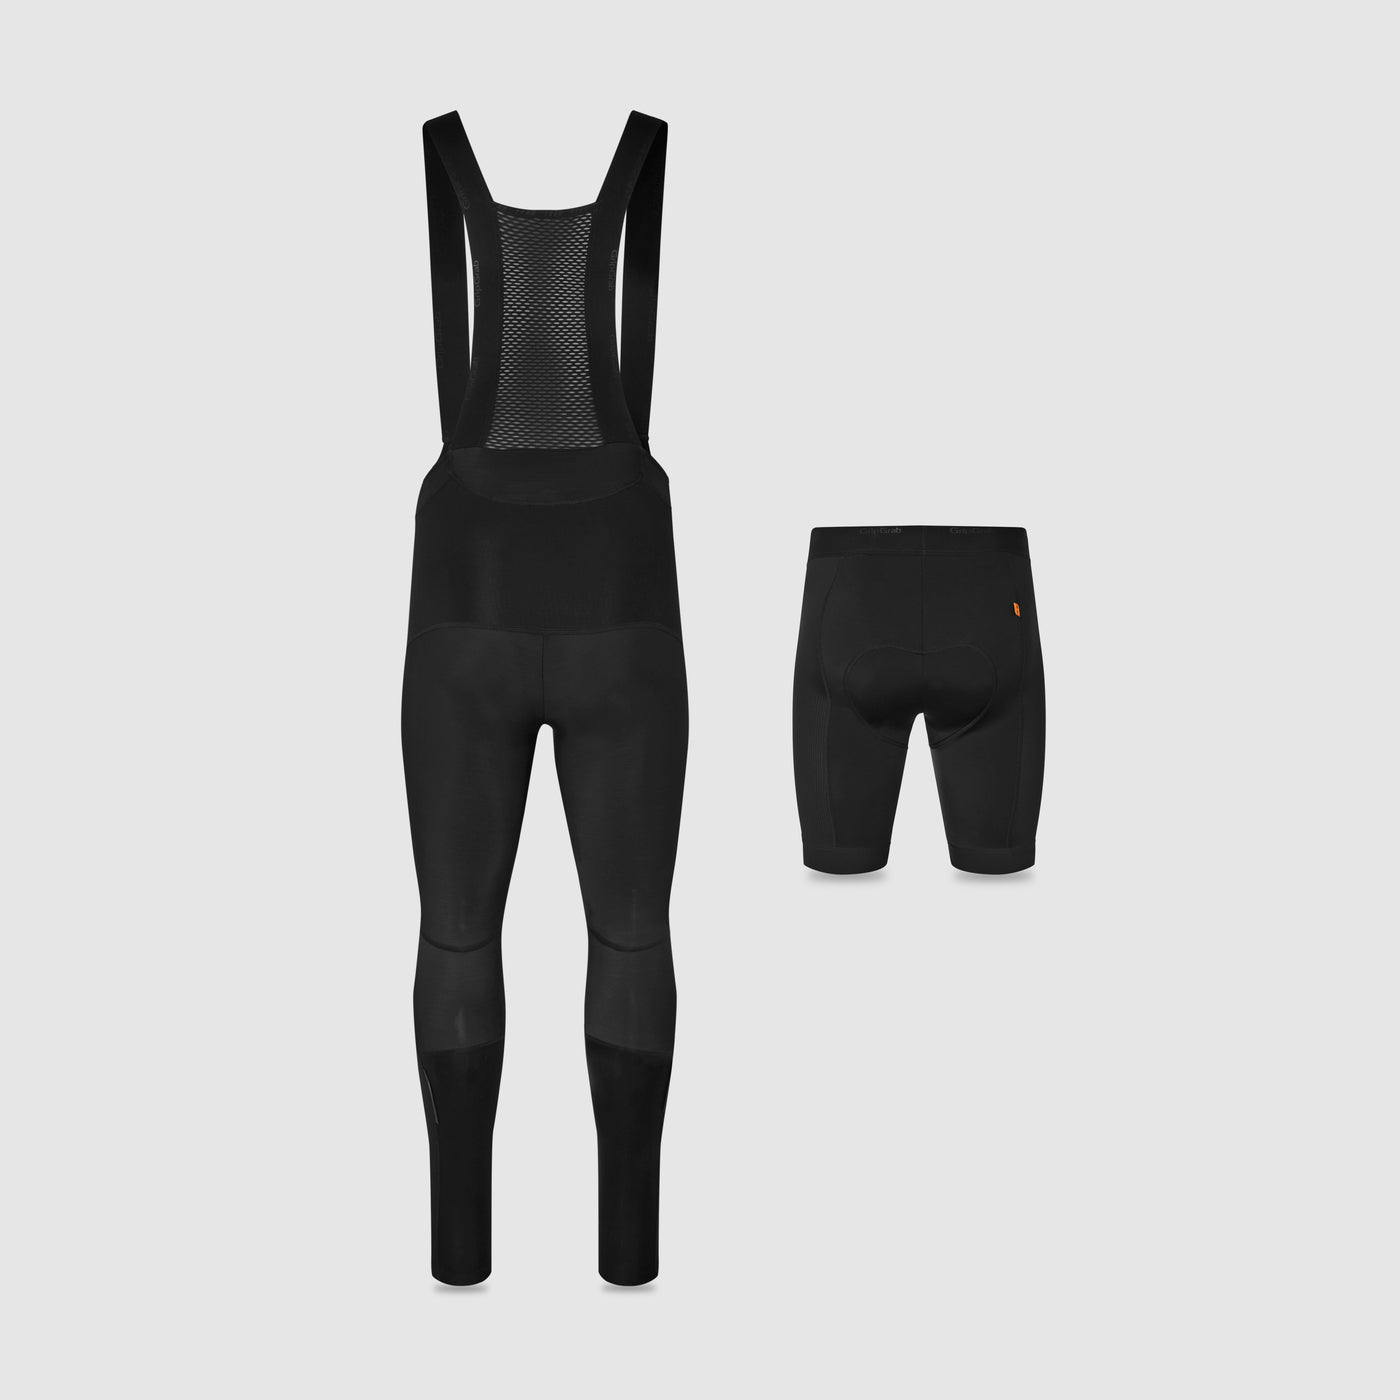 ThermaShell Water-Resistant Bib Tights